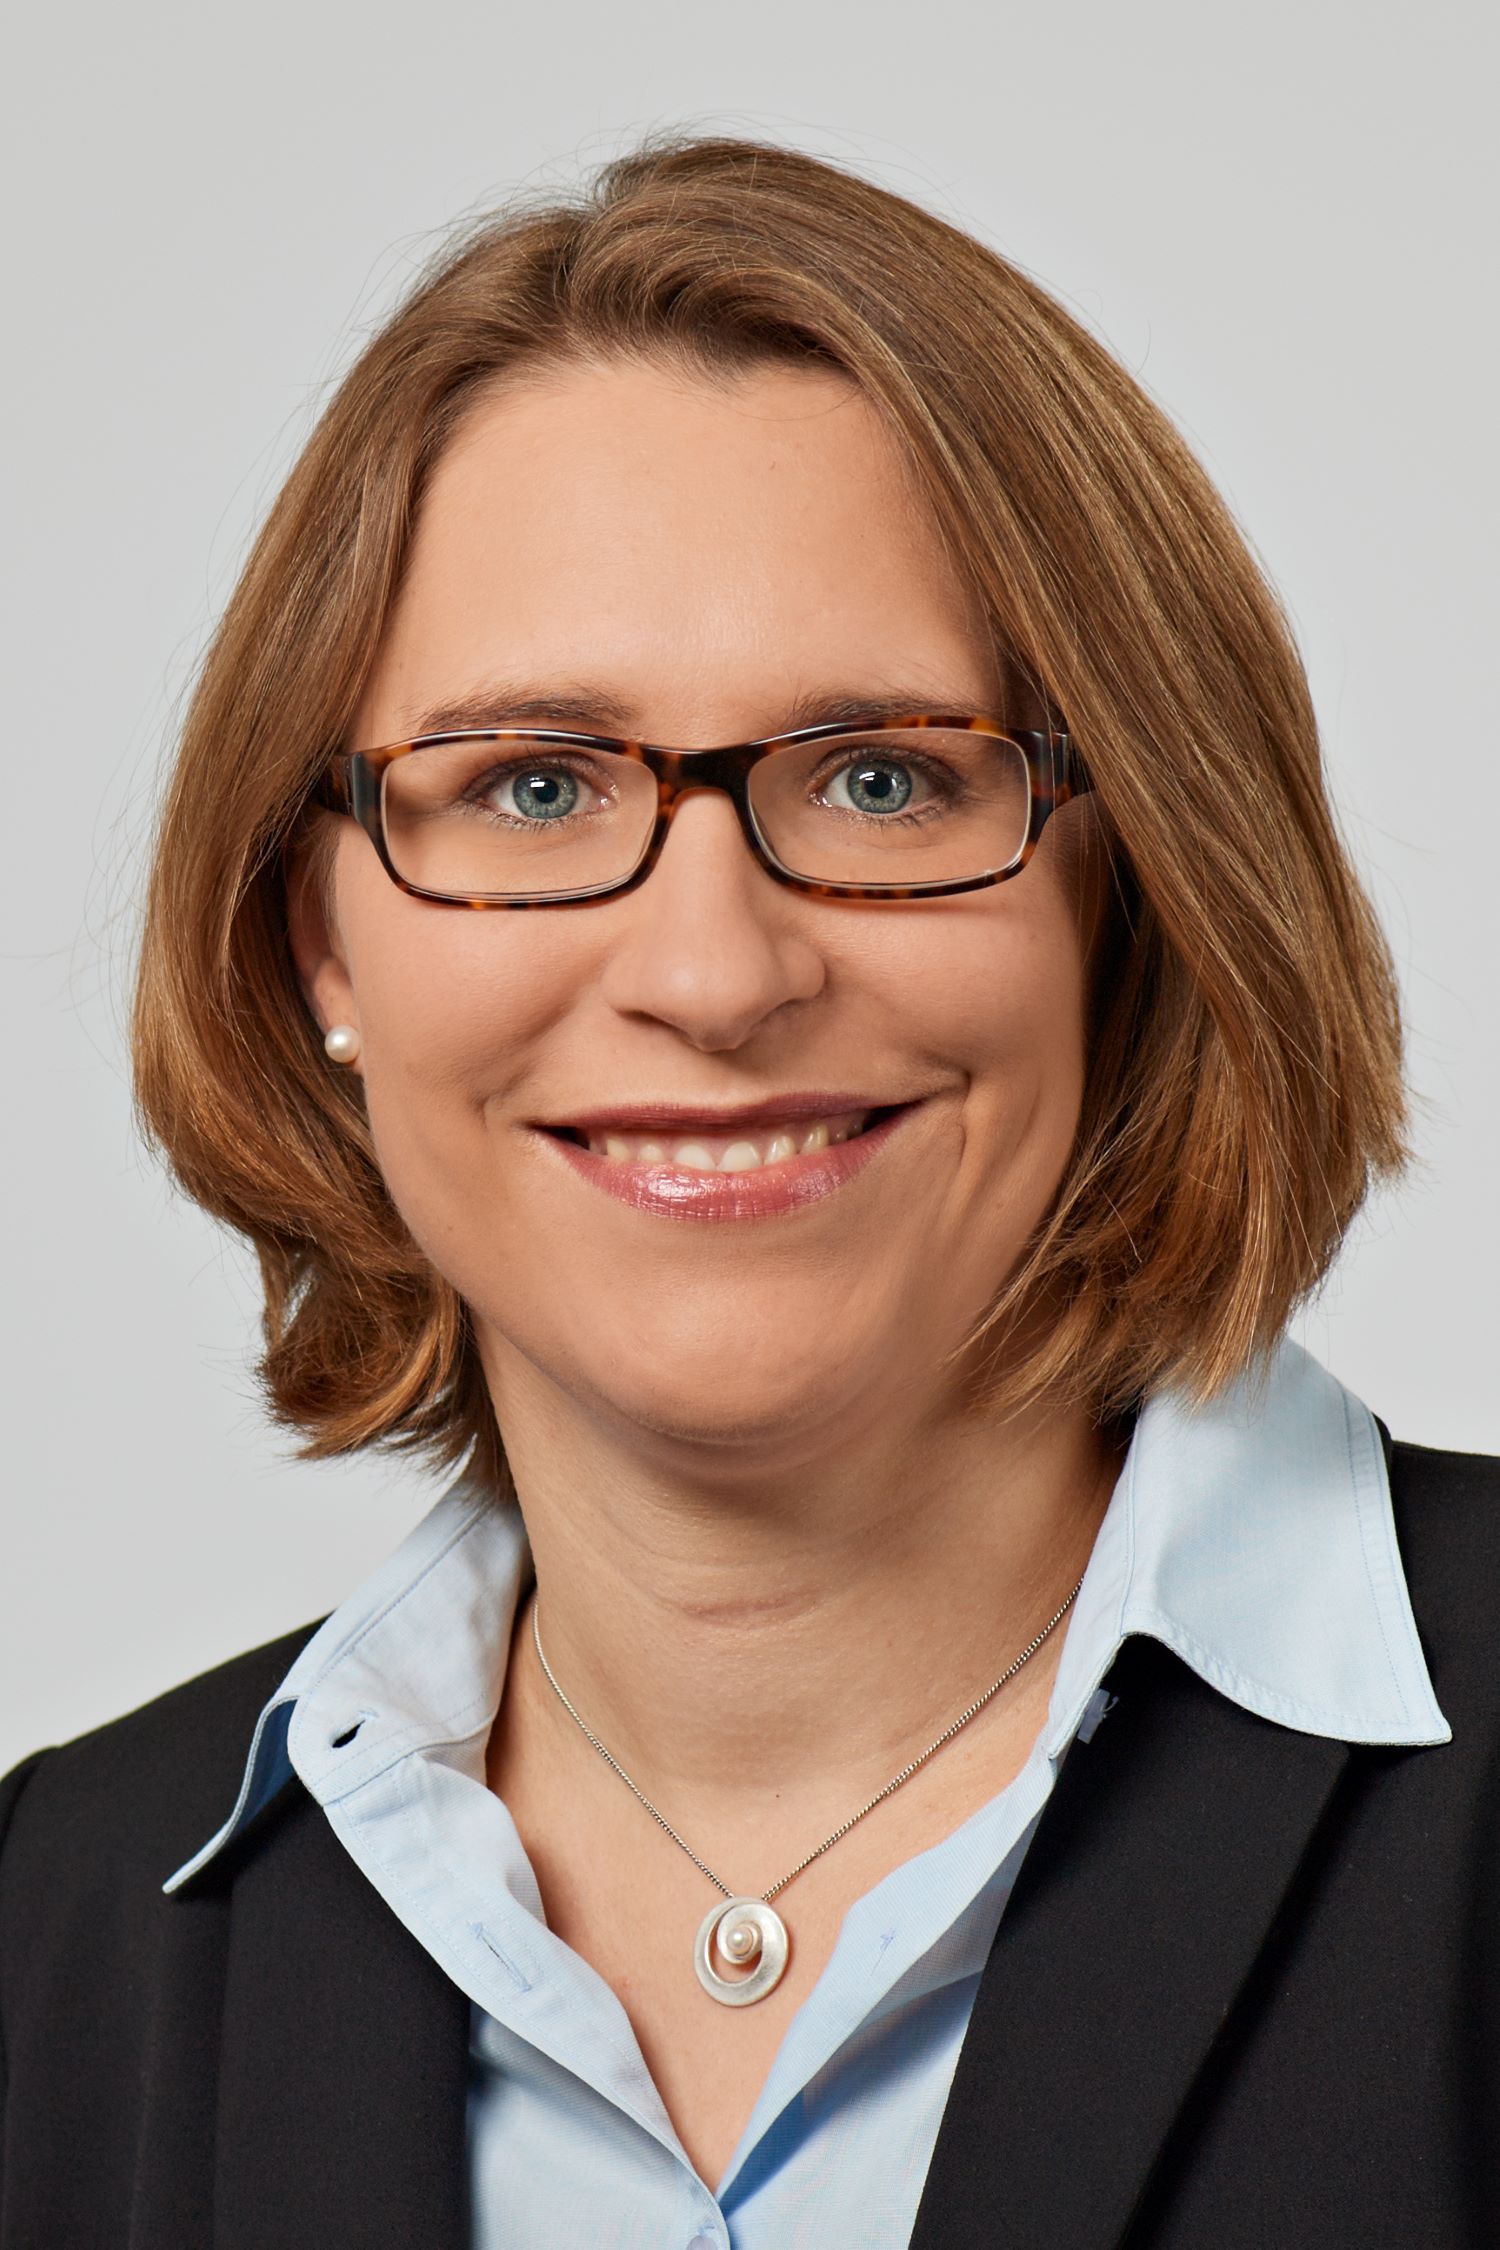 The International Federation of Robotics (IFR) has reportedly appointed Dr Susanne Bieller as new General Secretary.